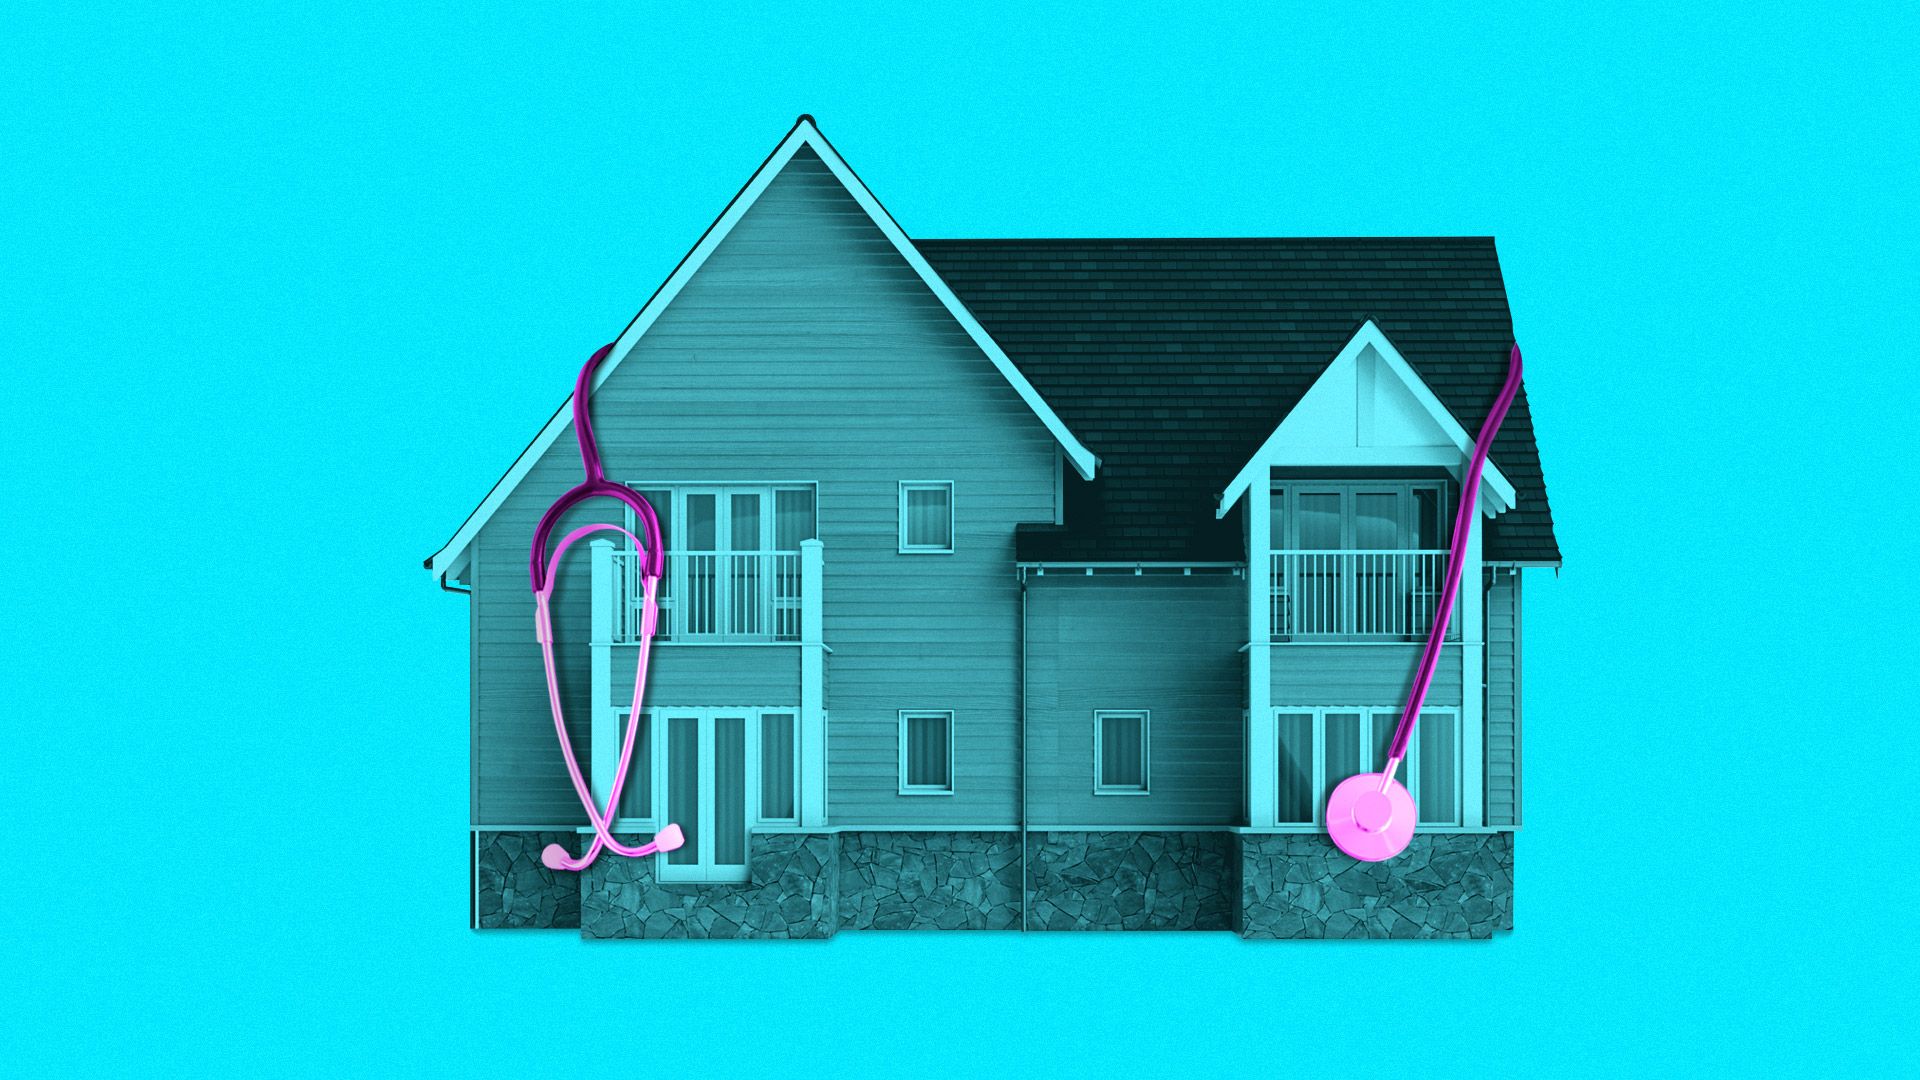 Illustration of house wearing a stethoscope